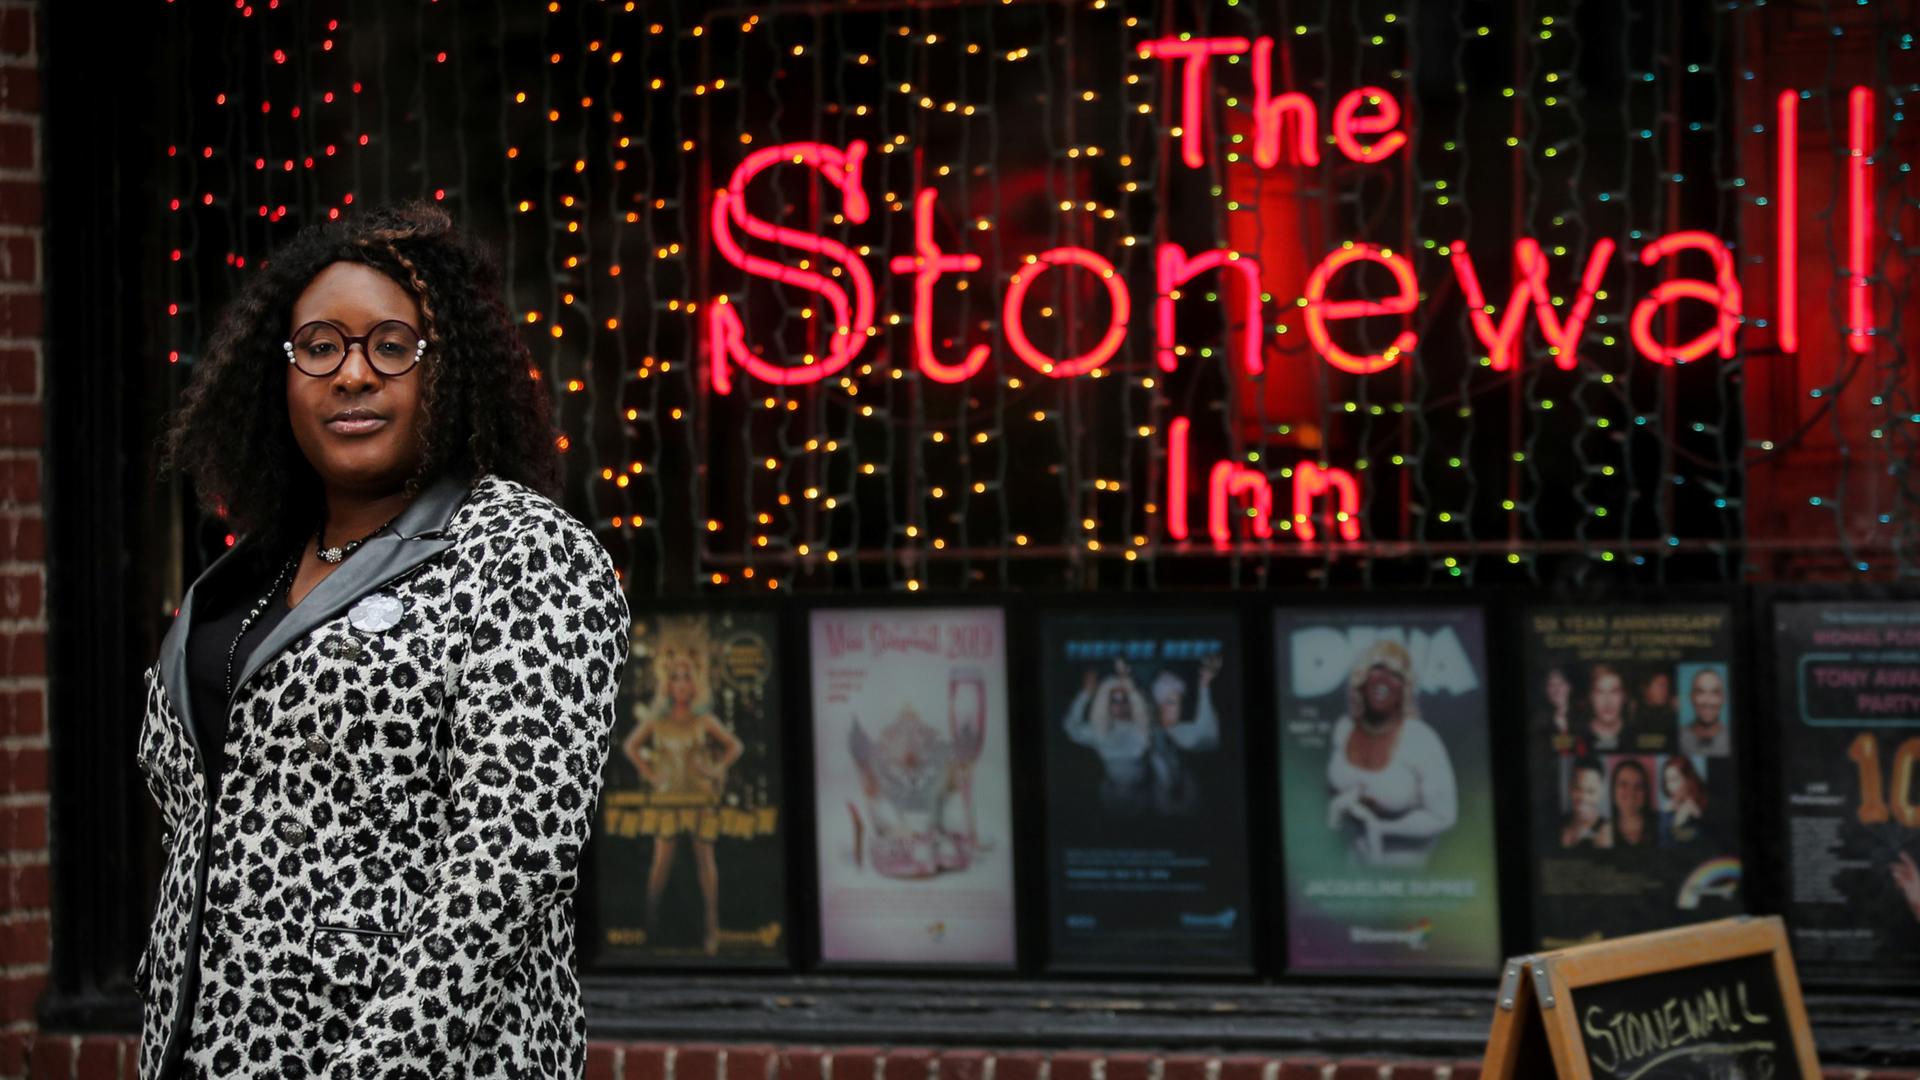 LaLa Zannell, a New York-based transgender rights activist, poses outside The Stonewall Inn in New York, U.S., May 30, 2019.